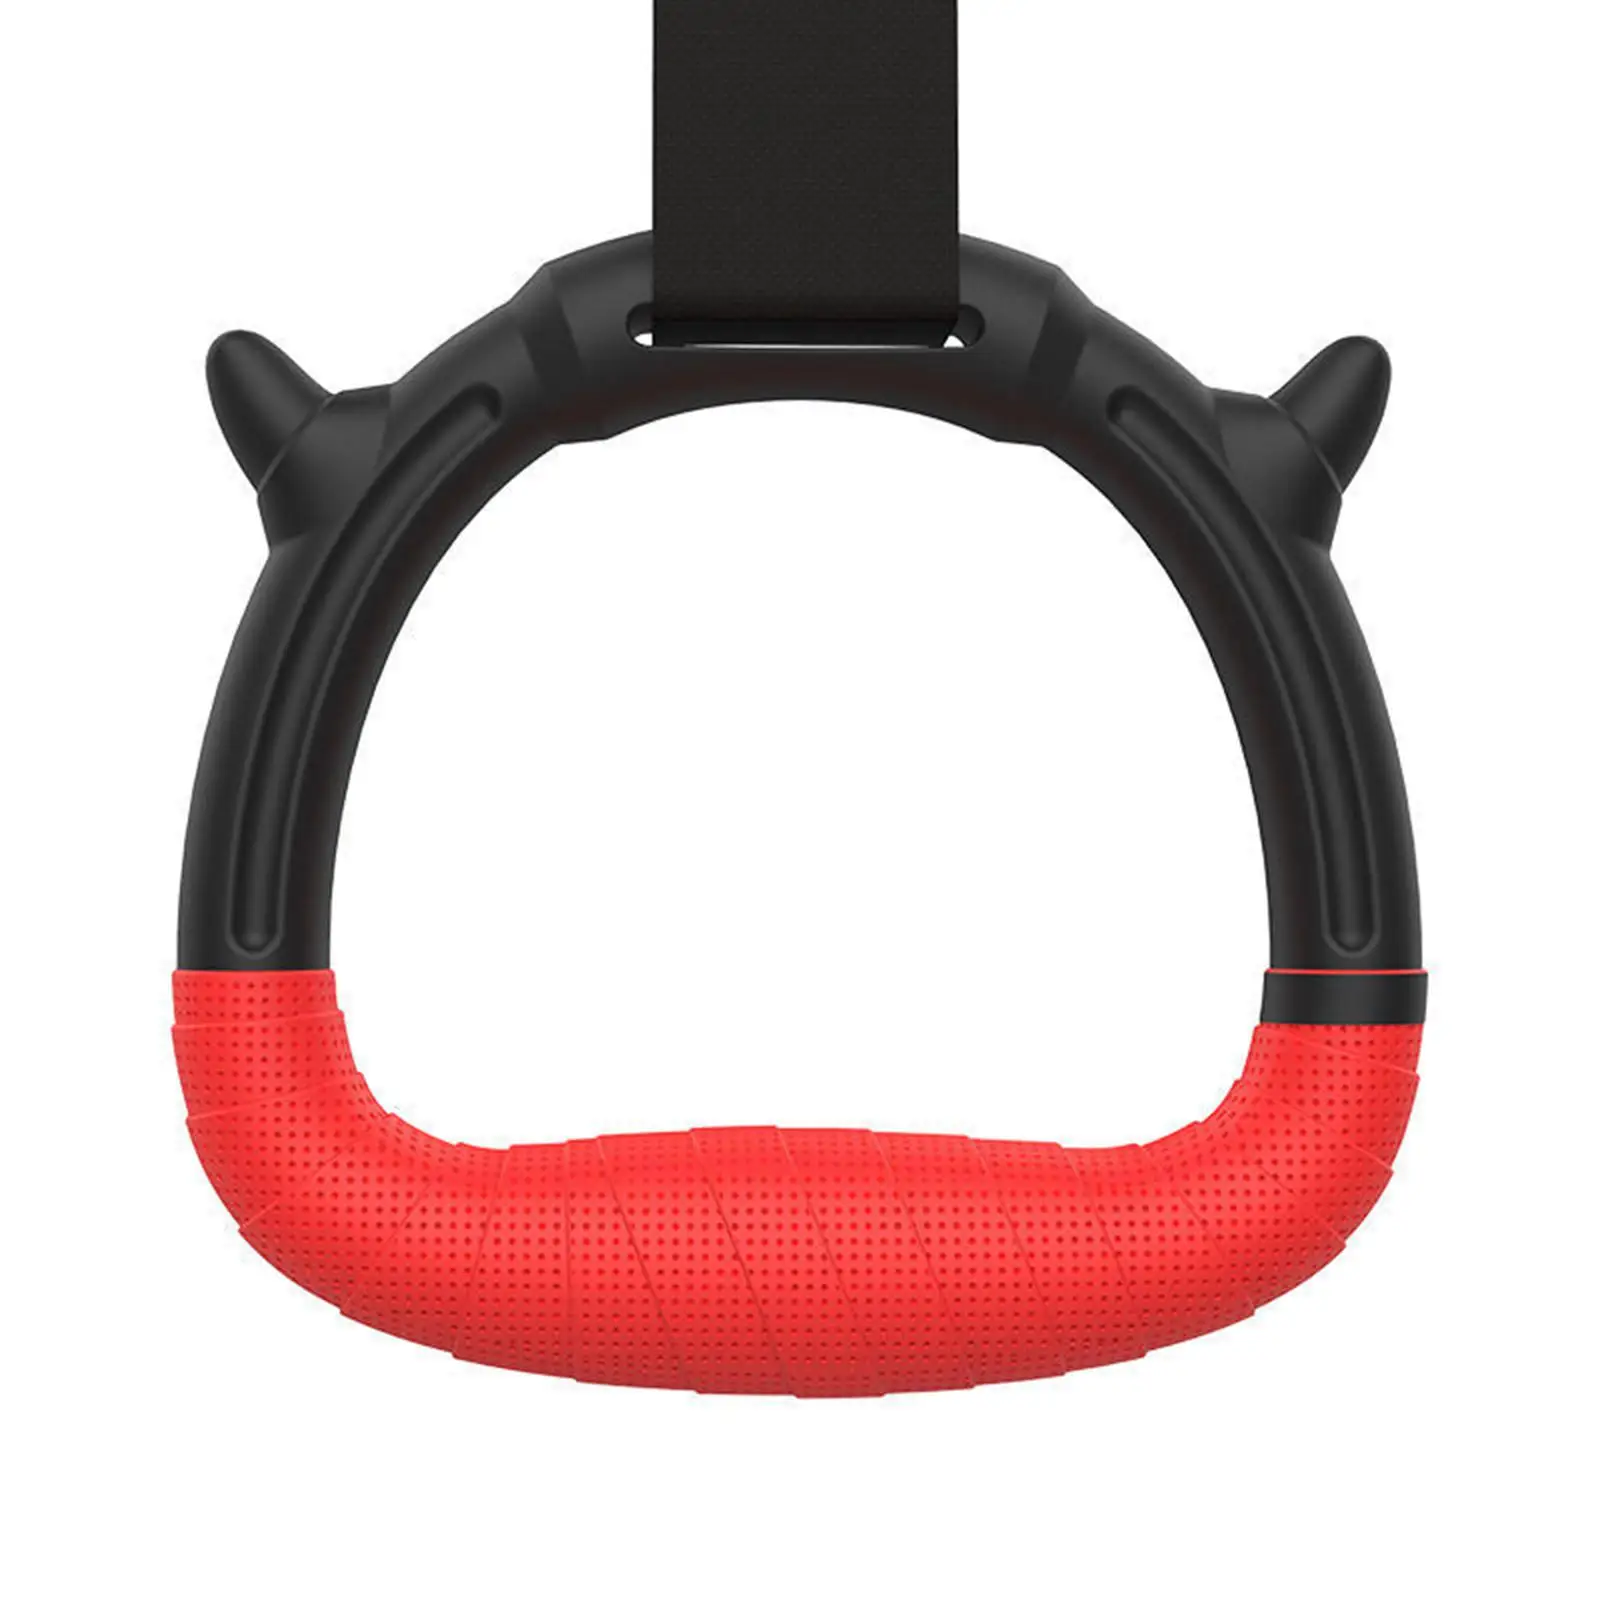 Gymnastics Rings Strength Training 661lbs Capacity Training Rings Gym Ring for Kids Adult Full Body Workout Home Gym Beginners